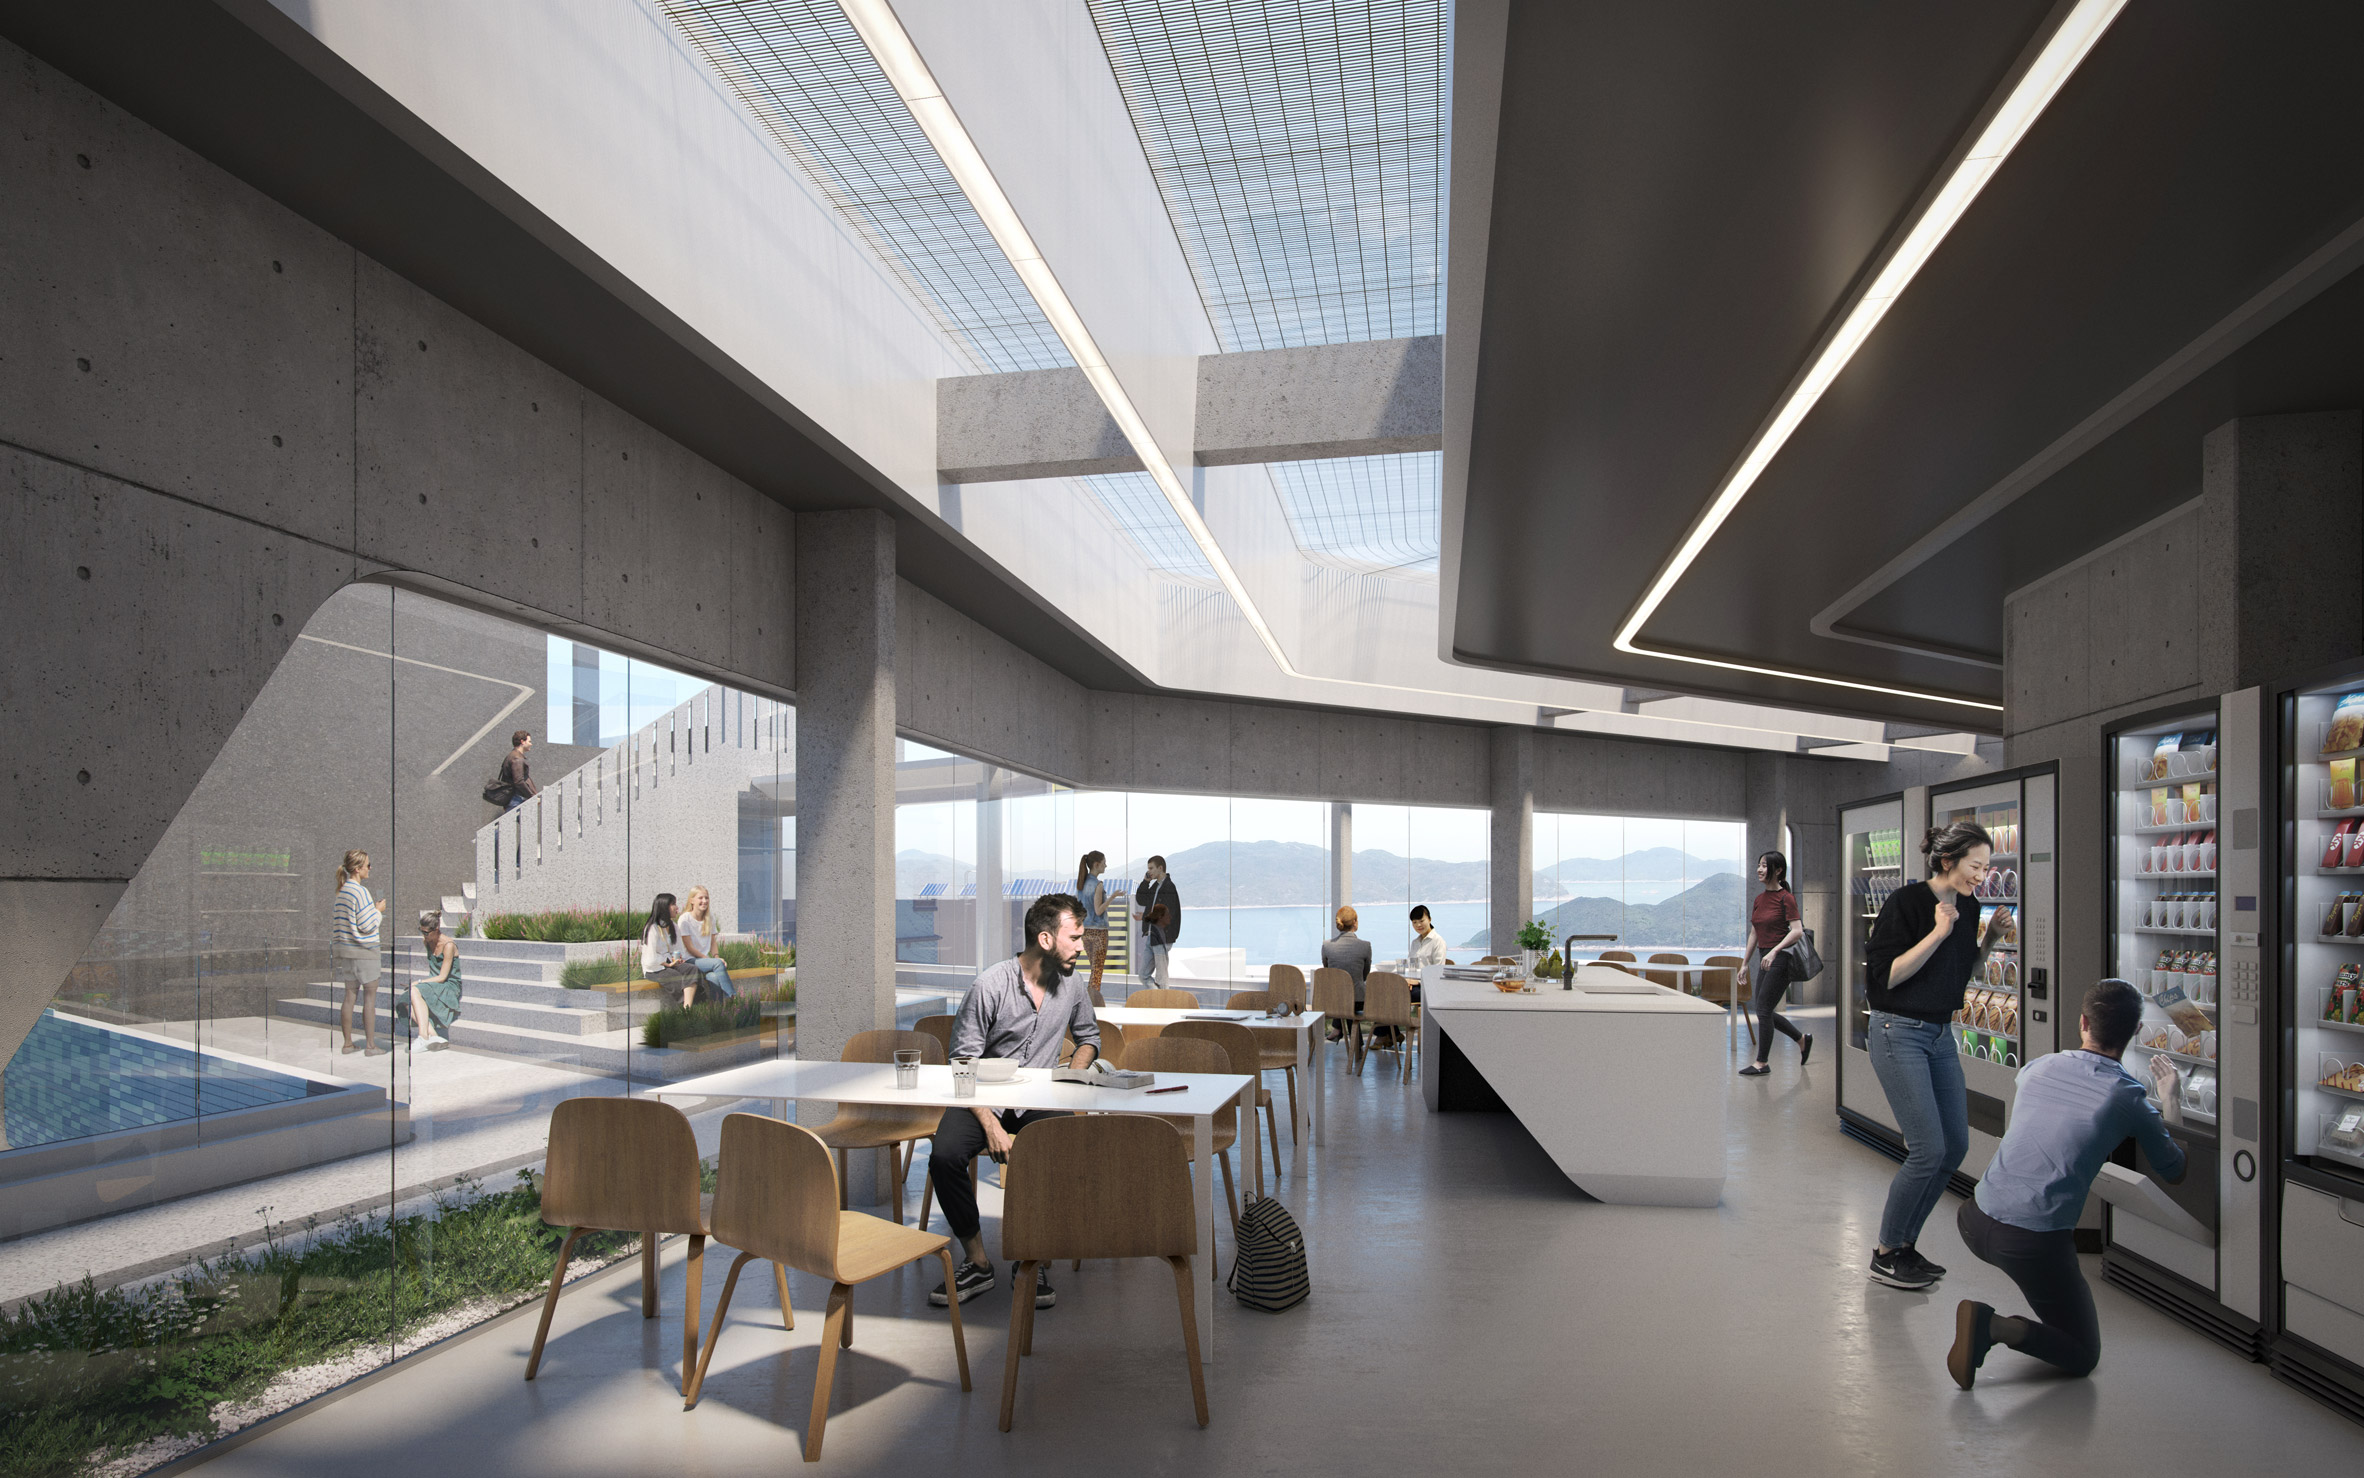 A co-living space inside the Student Residence Development at HKUST by Zaha Hadid Architects